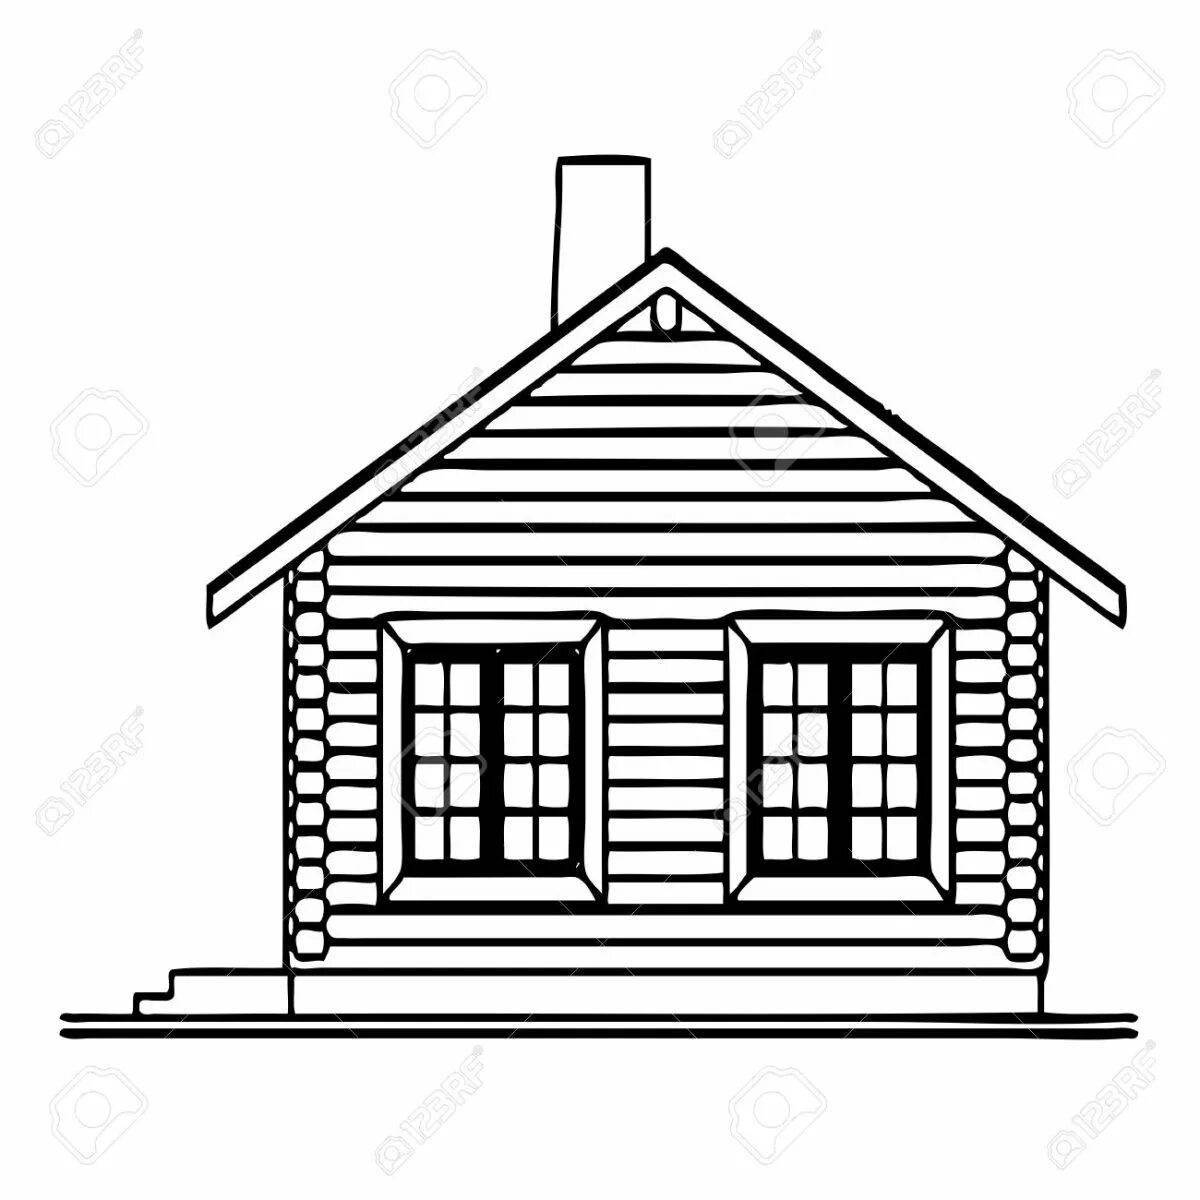 Exquisite wooden hut coloring page